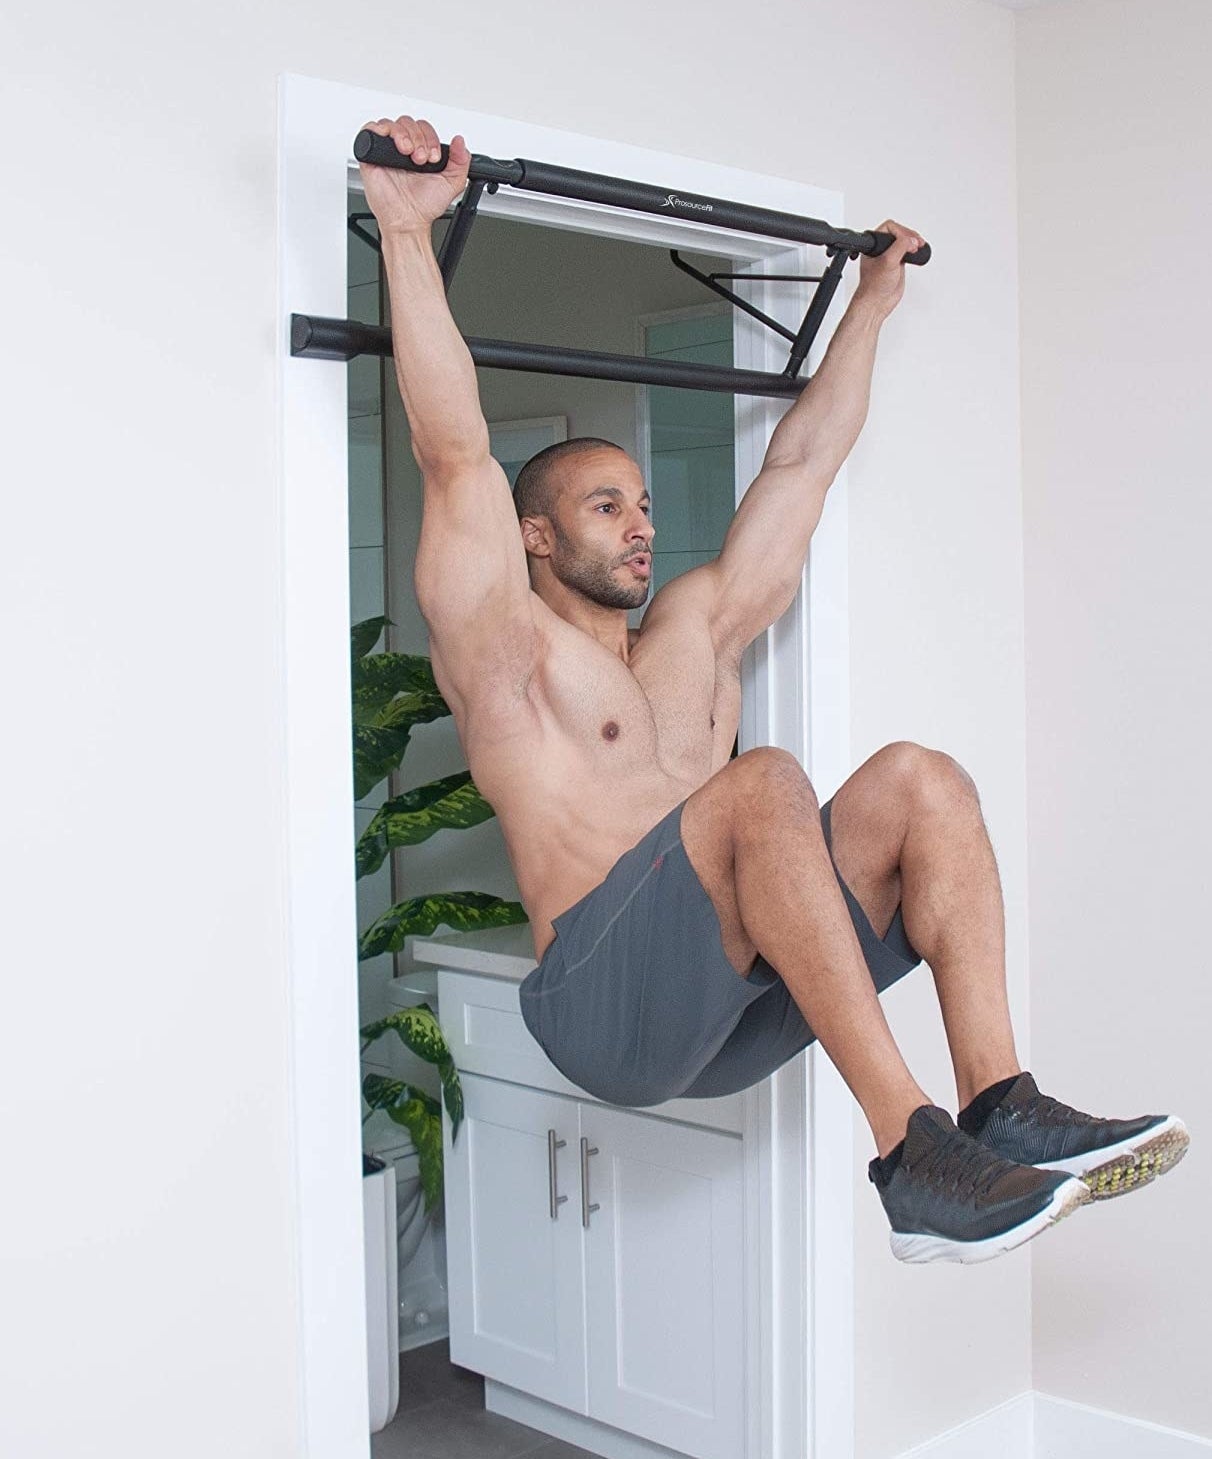 Model doing a pull-up with the black bar attached to a door frame